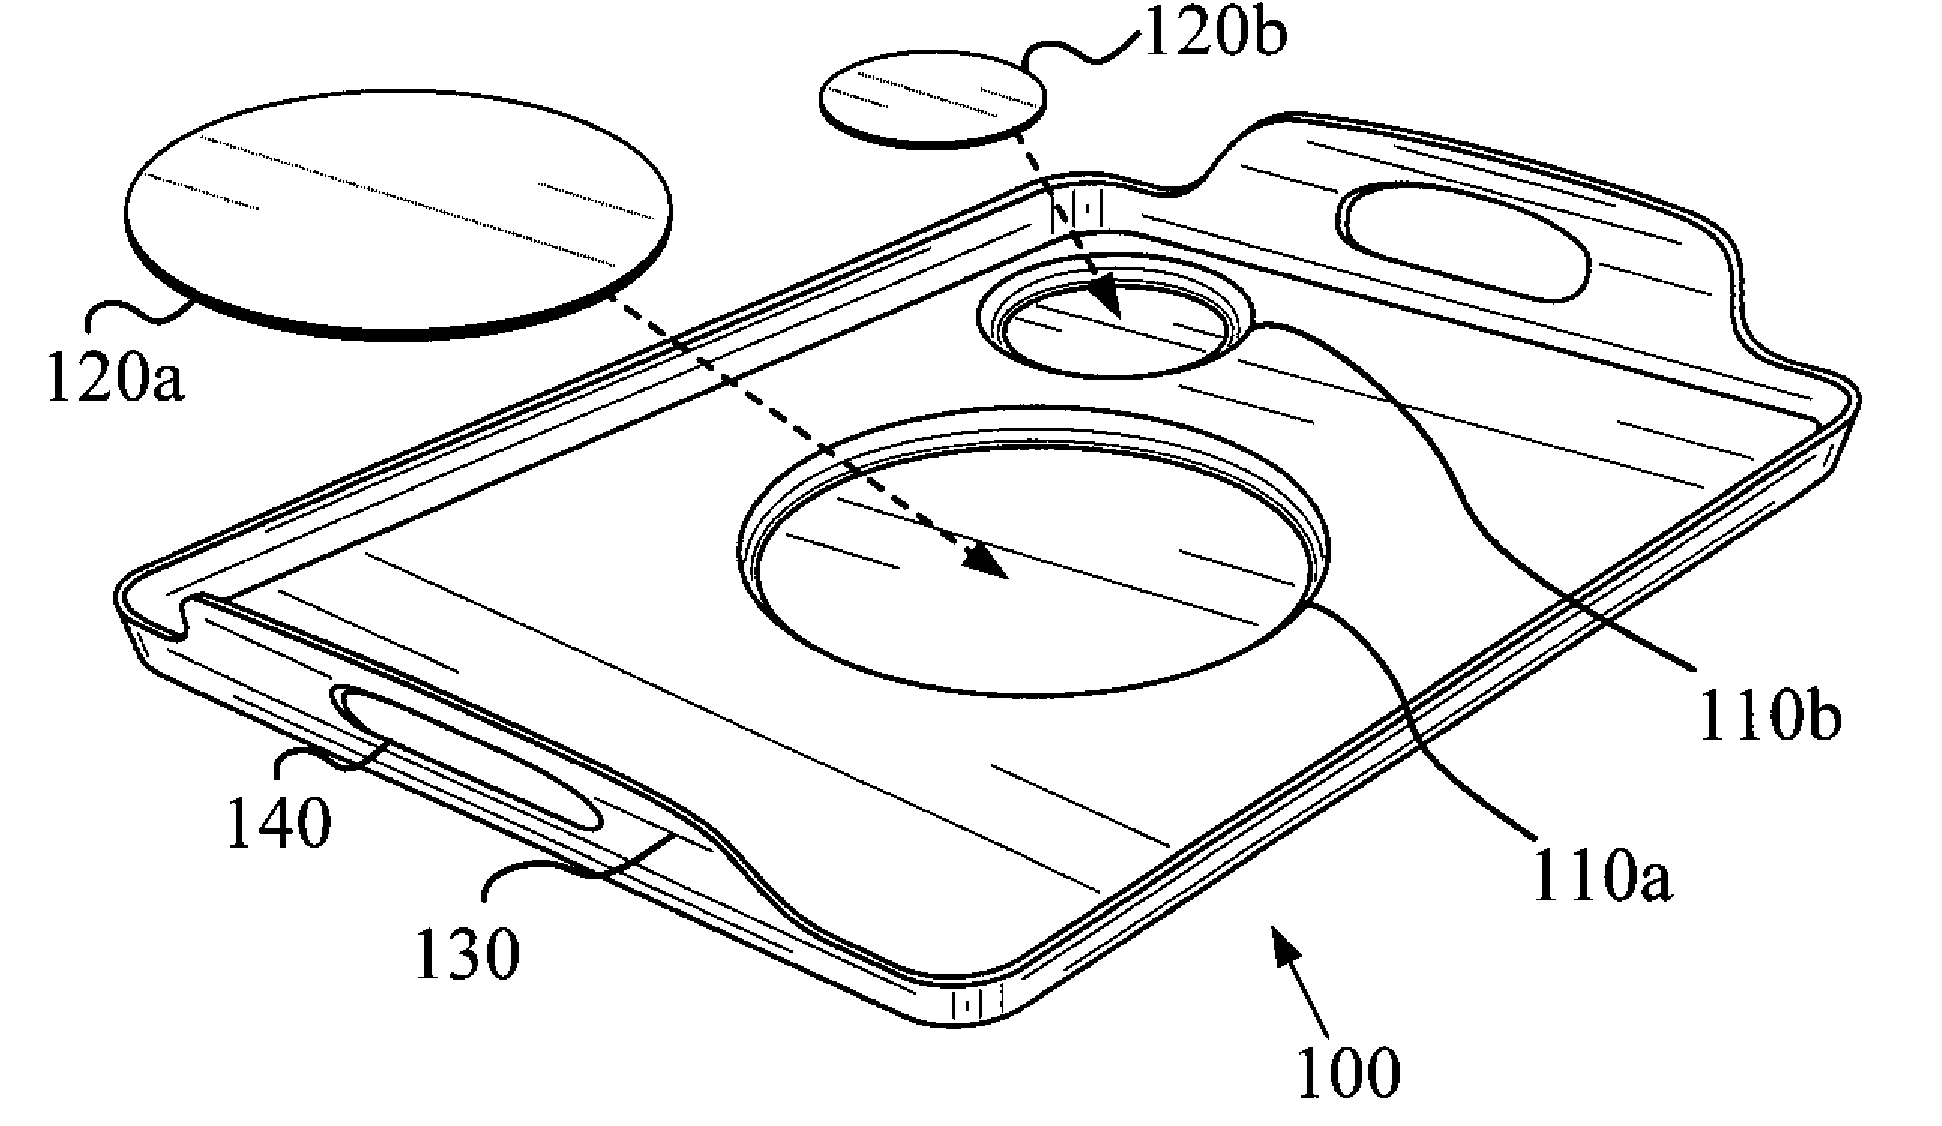 Food tray with non-slip inserts